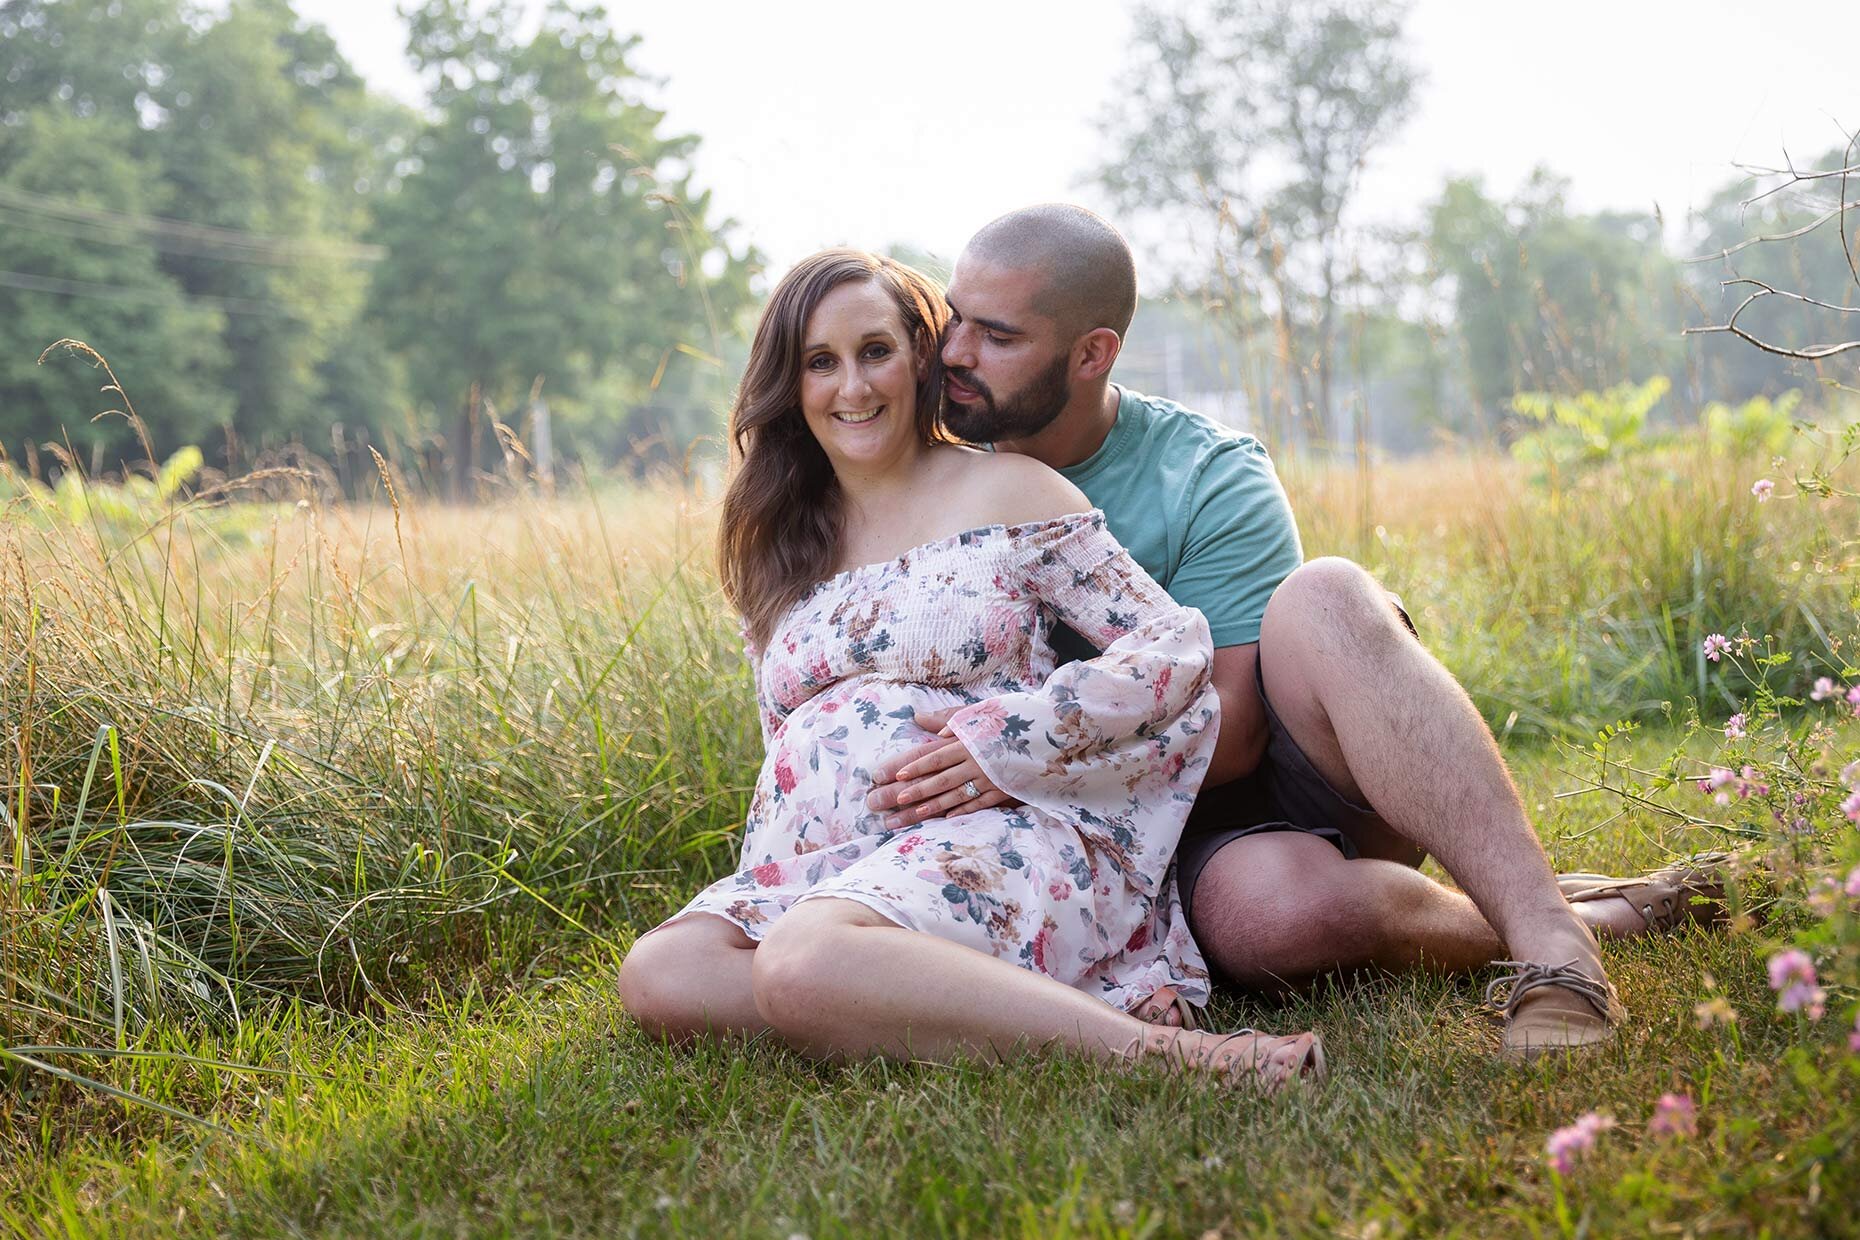 Seated Maternity Photo in grassy field at sunset